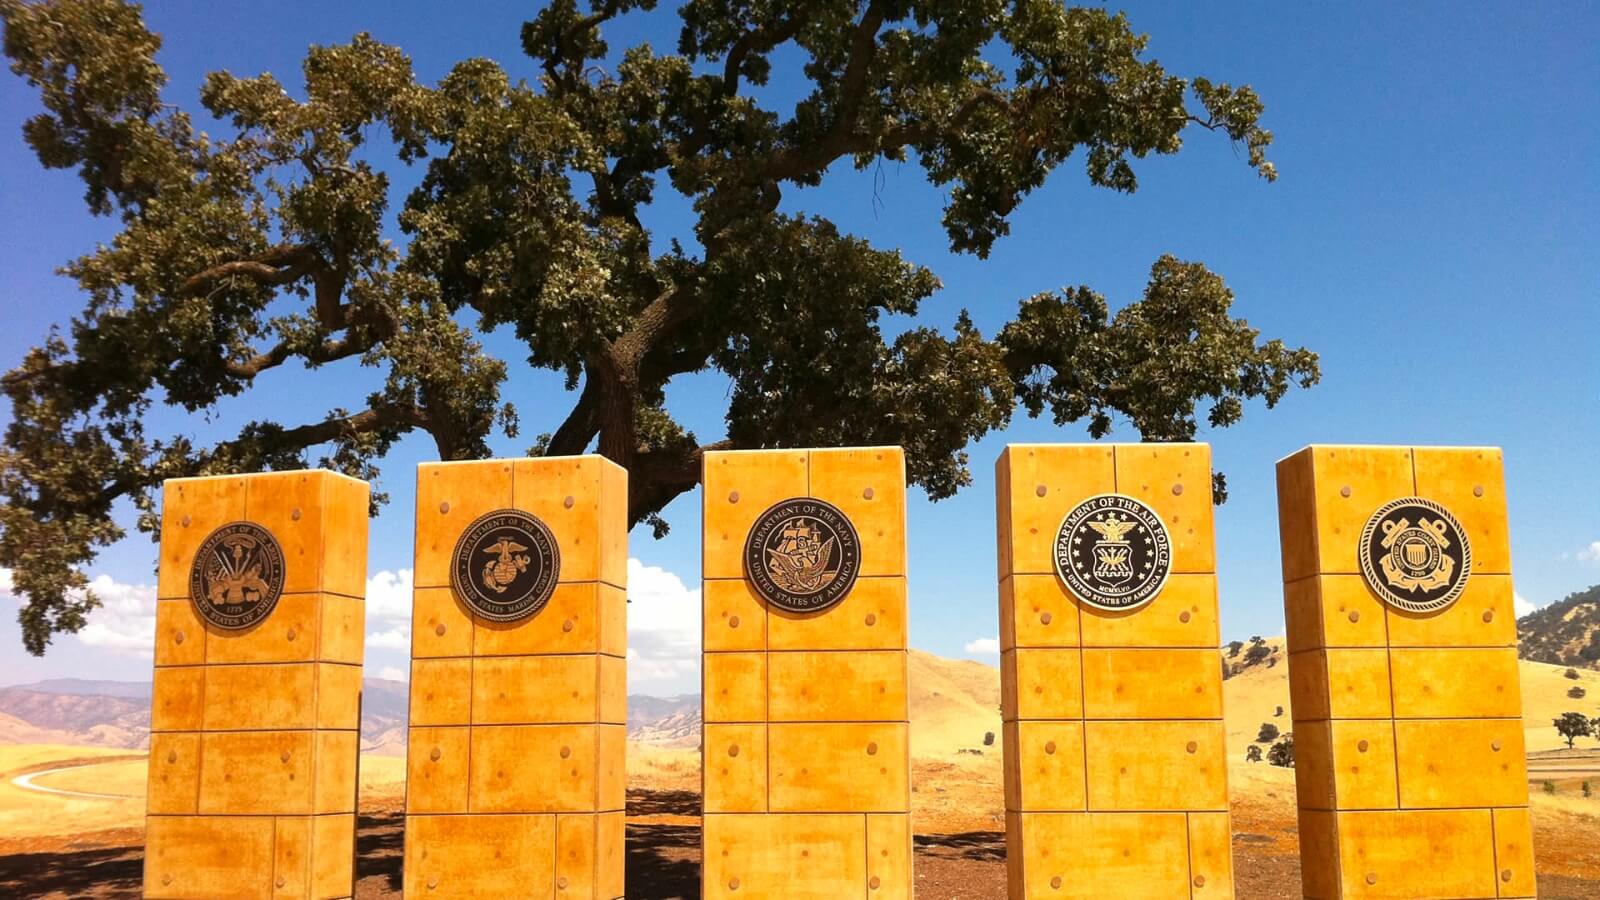 Monument at Tejon Ranch honoring the five branches of the U.S. military